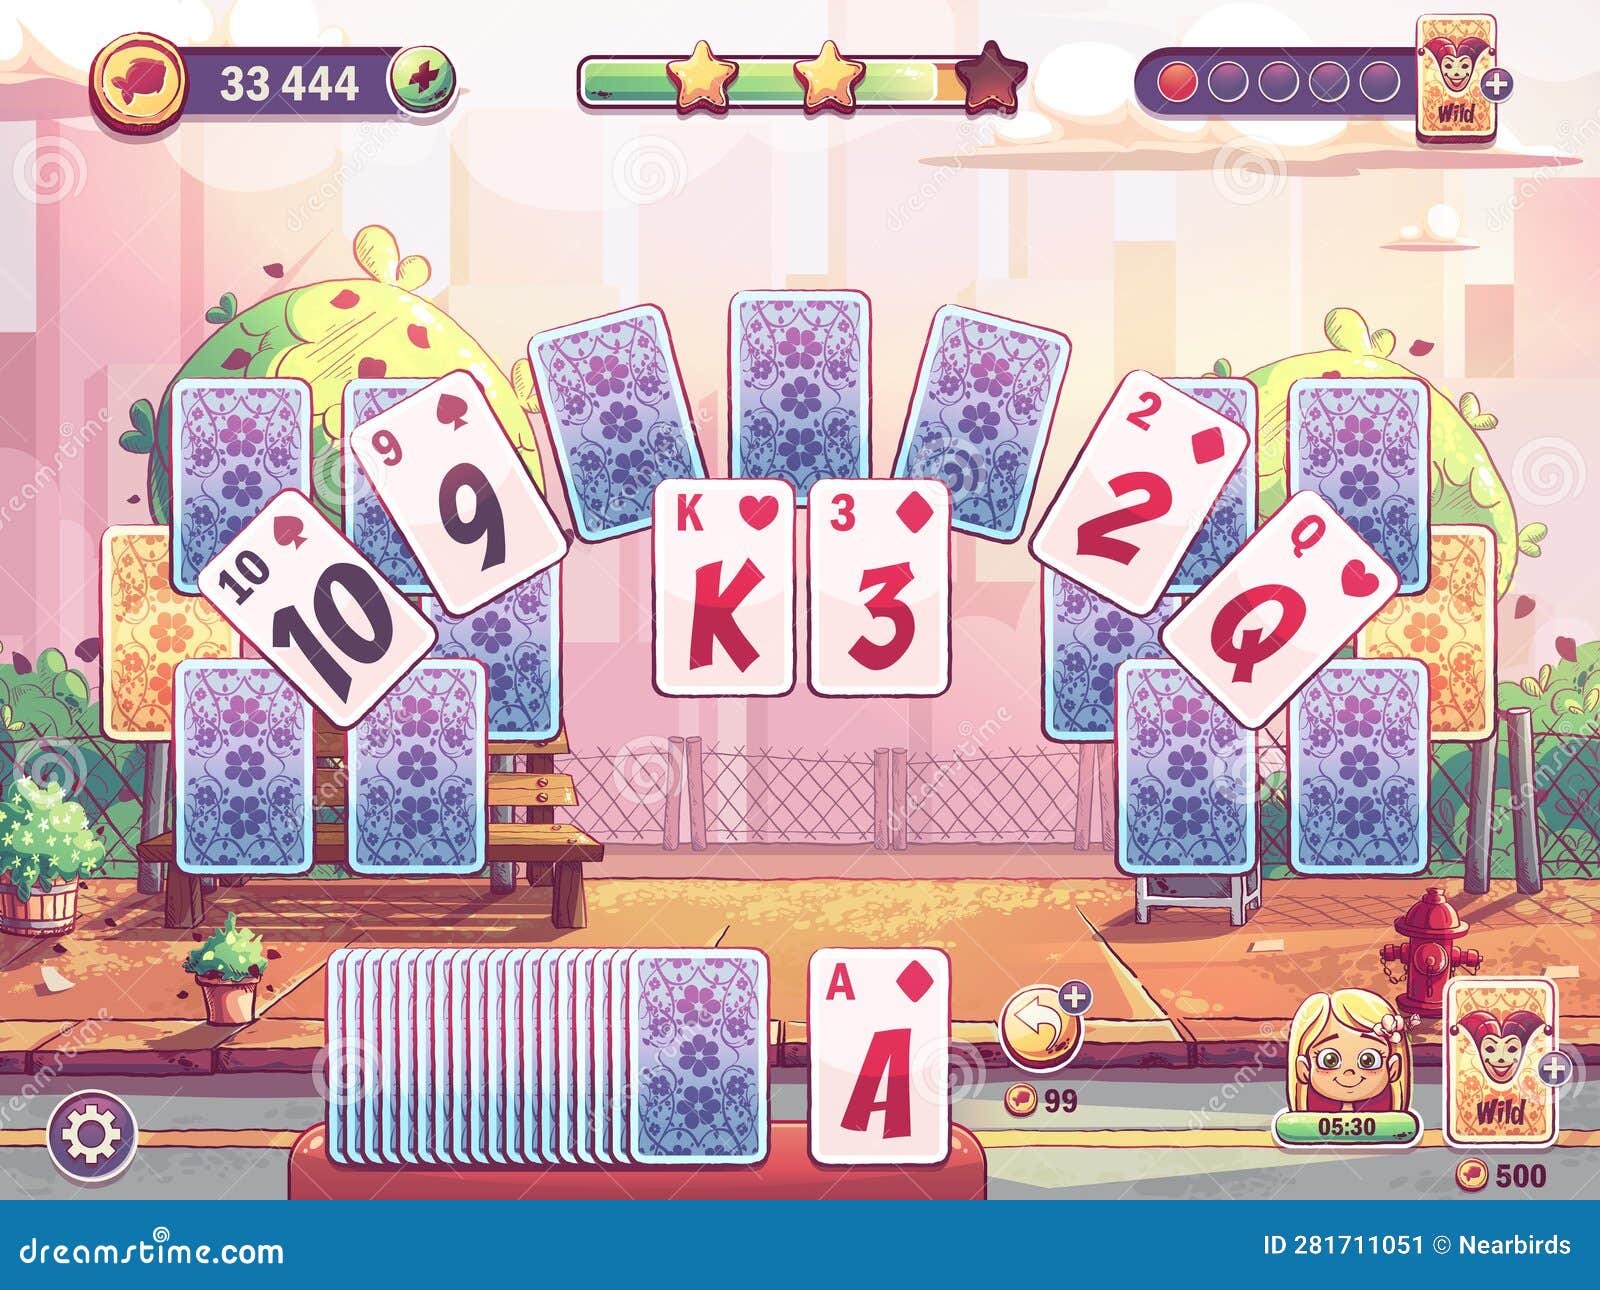 An Illustrative Solitaire Game